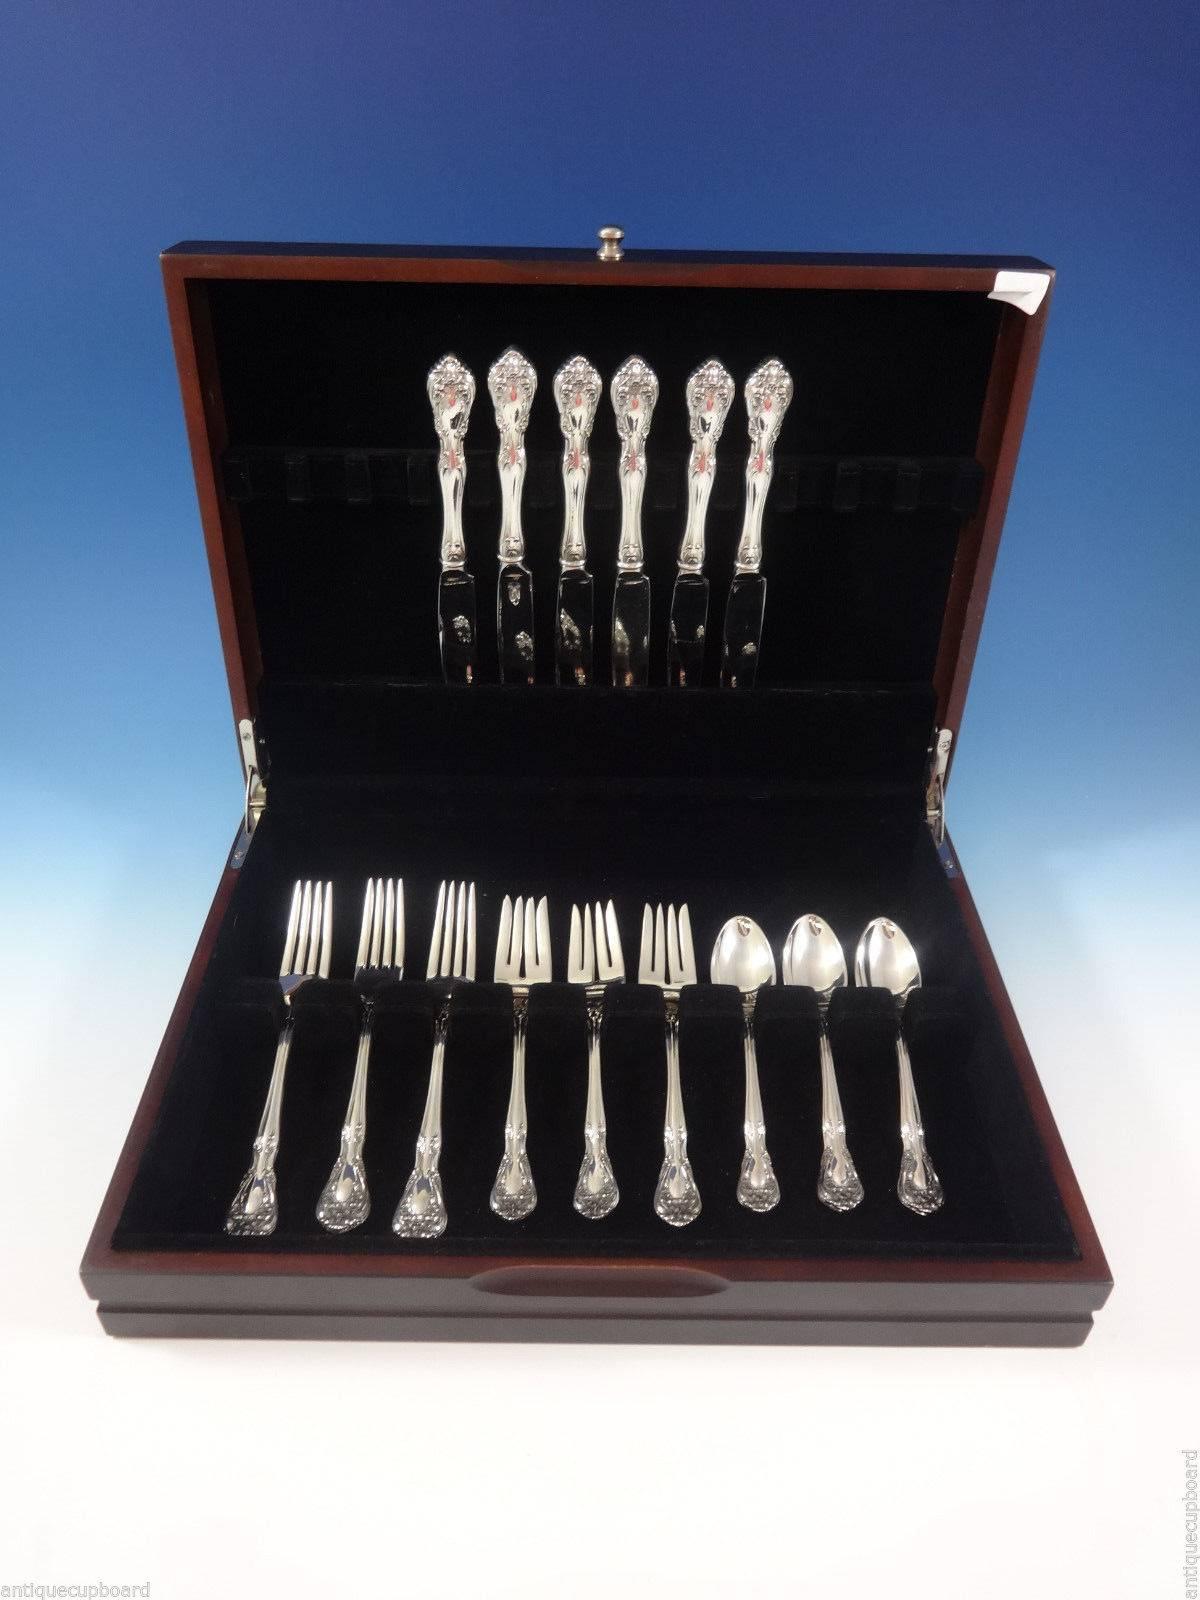 Chateau rose by Alvin sterling silver flatware set - 24 pieces. Great starter set! This set includes: 

six knives, 8 7/8